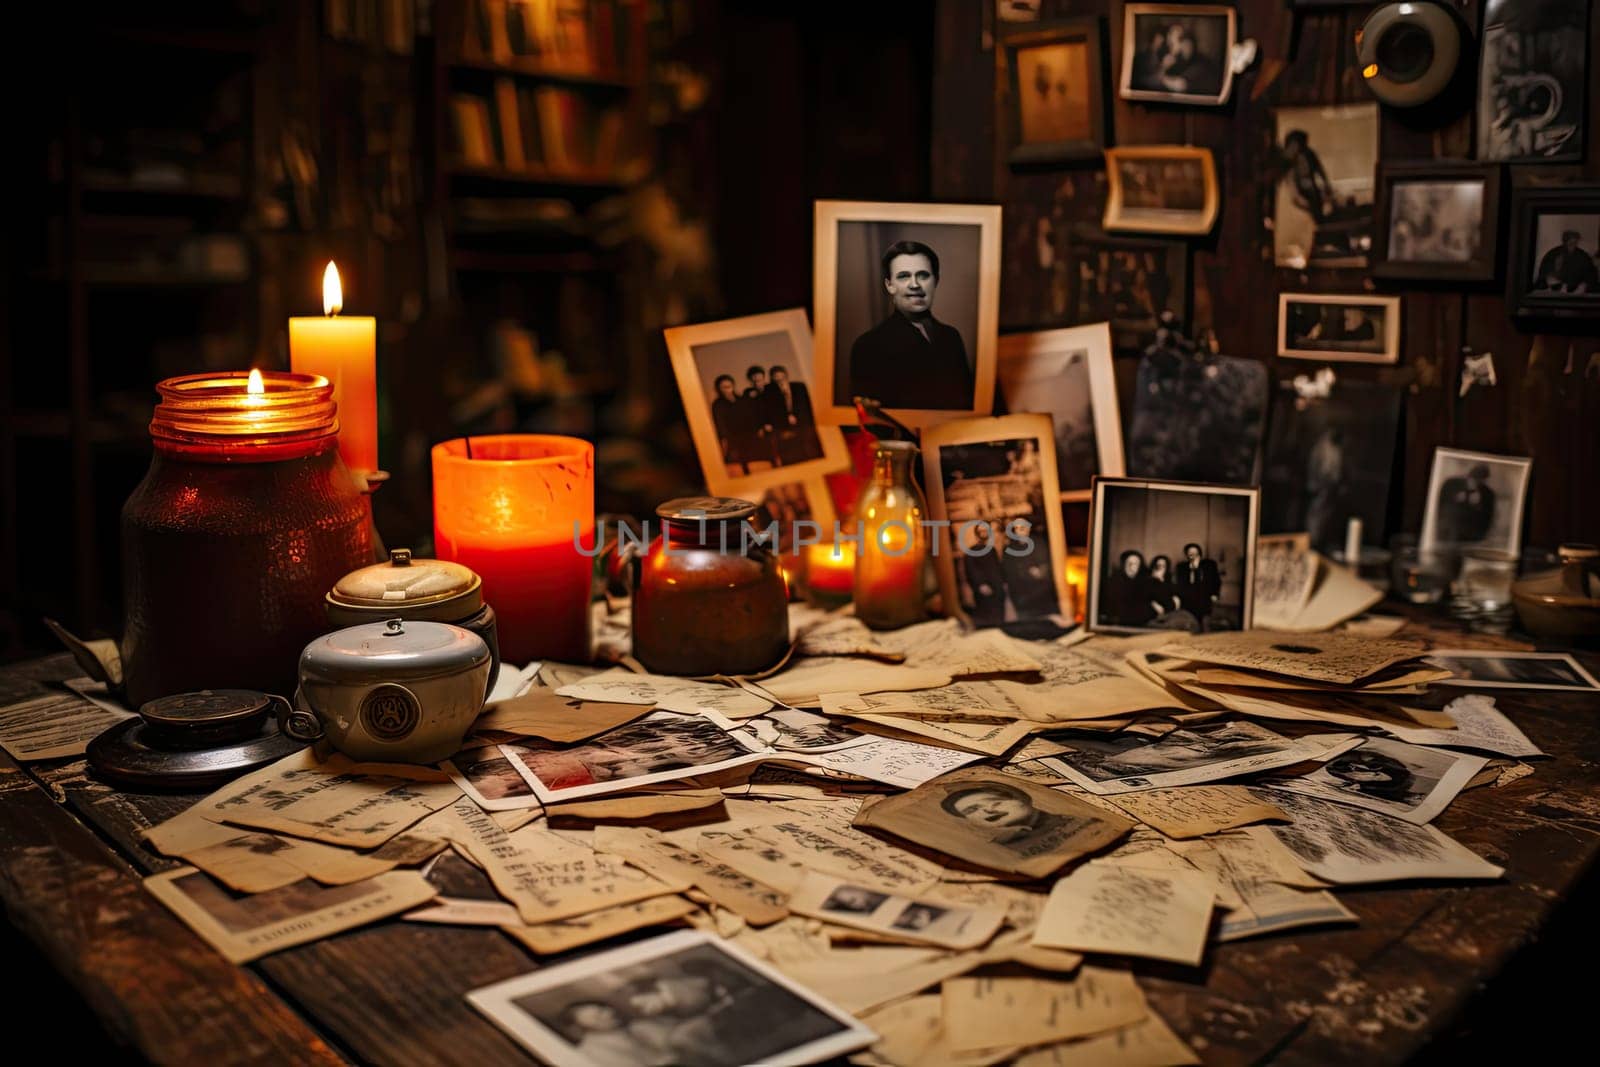 A Table of Memories: A Collection of Pictures and Candles Create a Cozy and Nostalgic Atmosphere